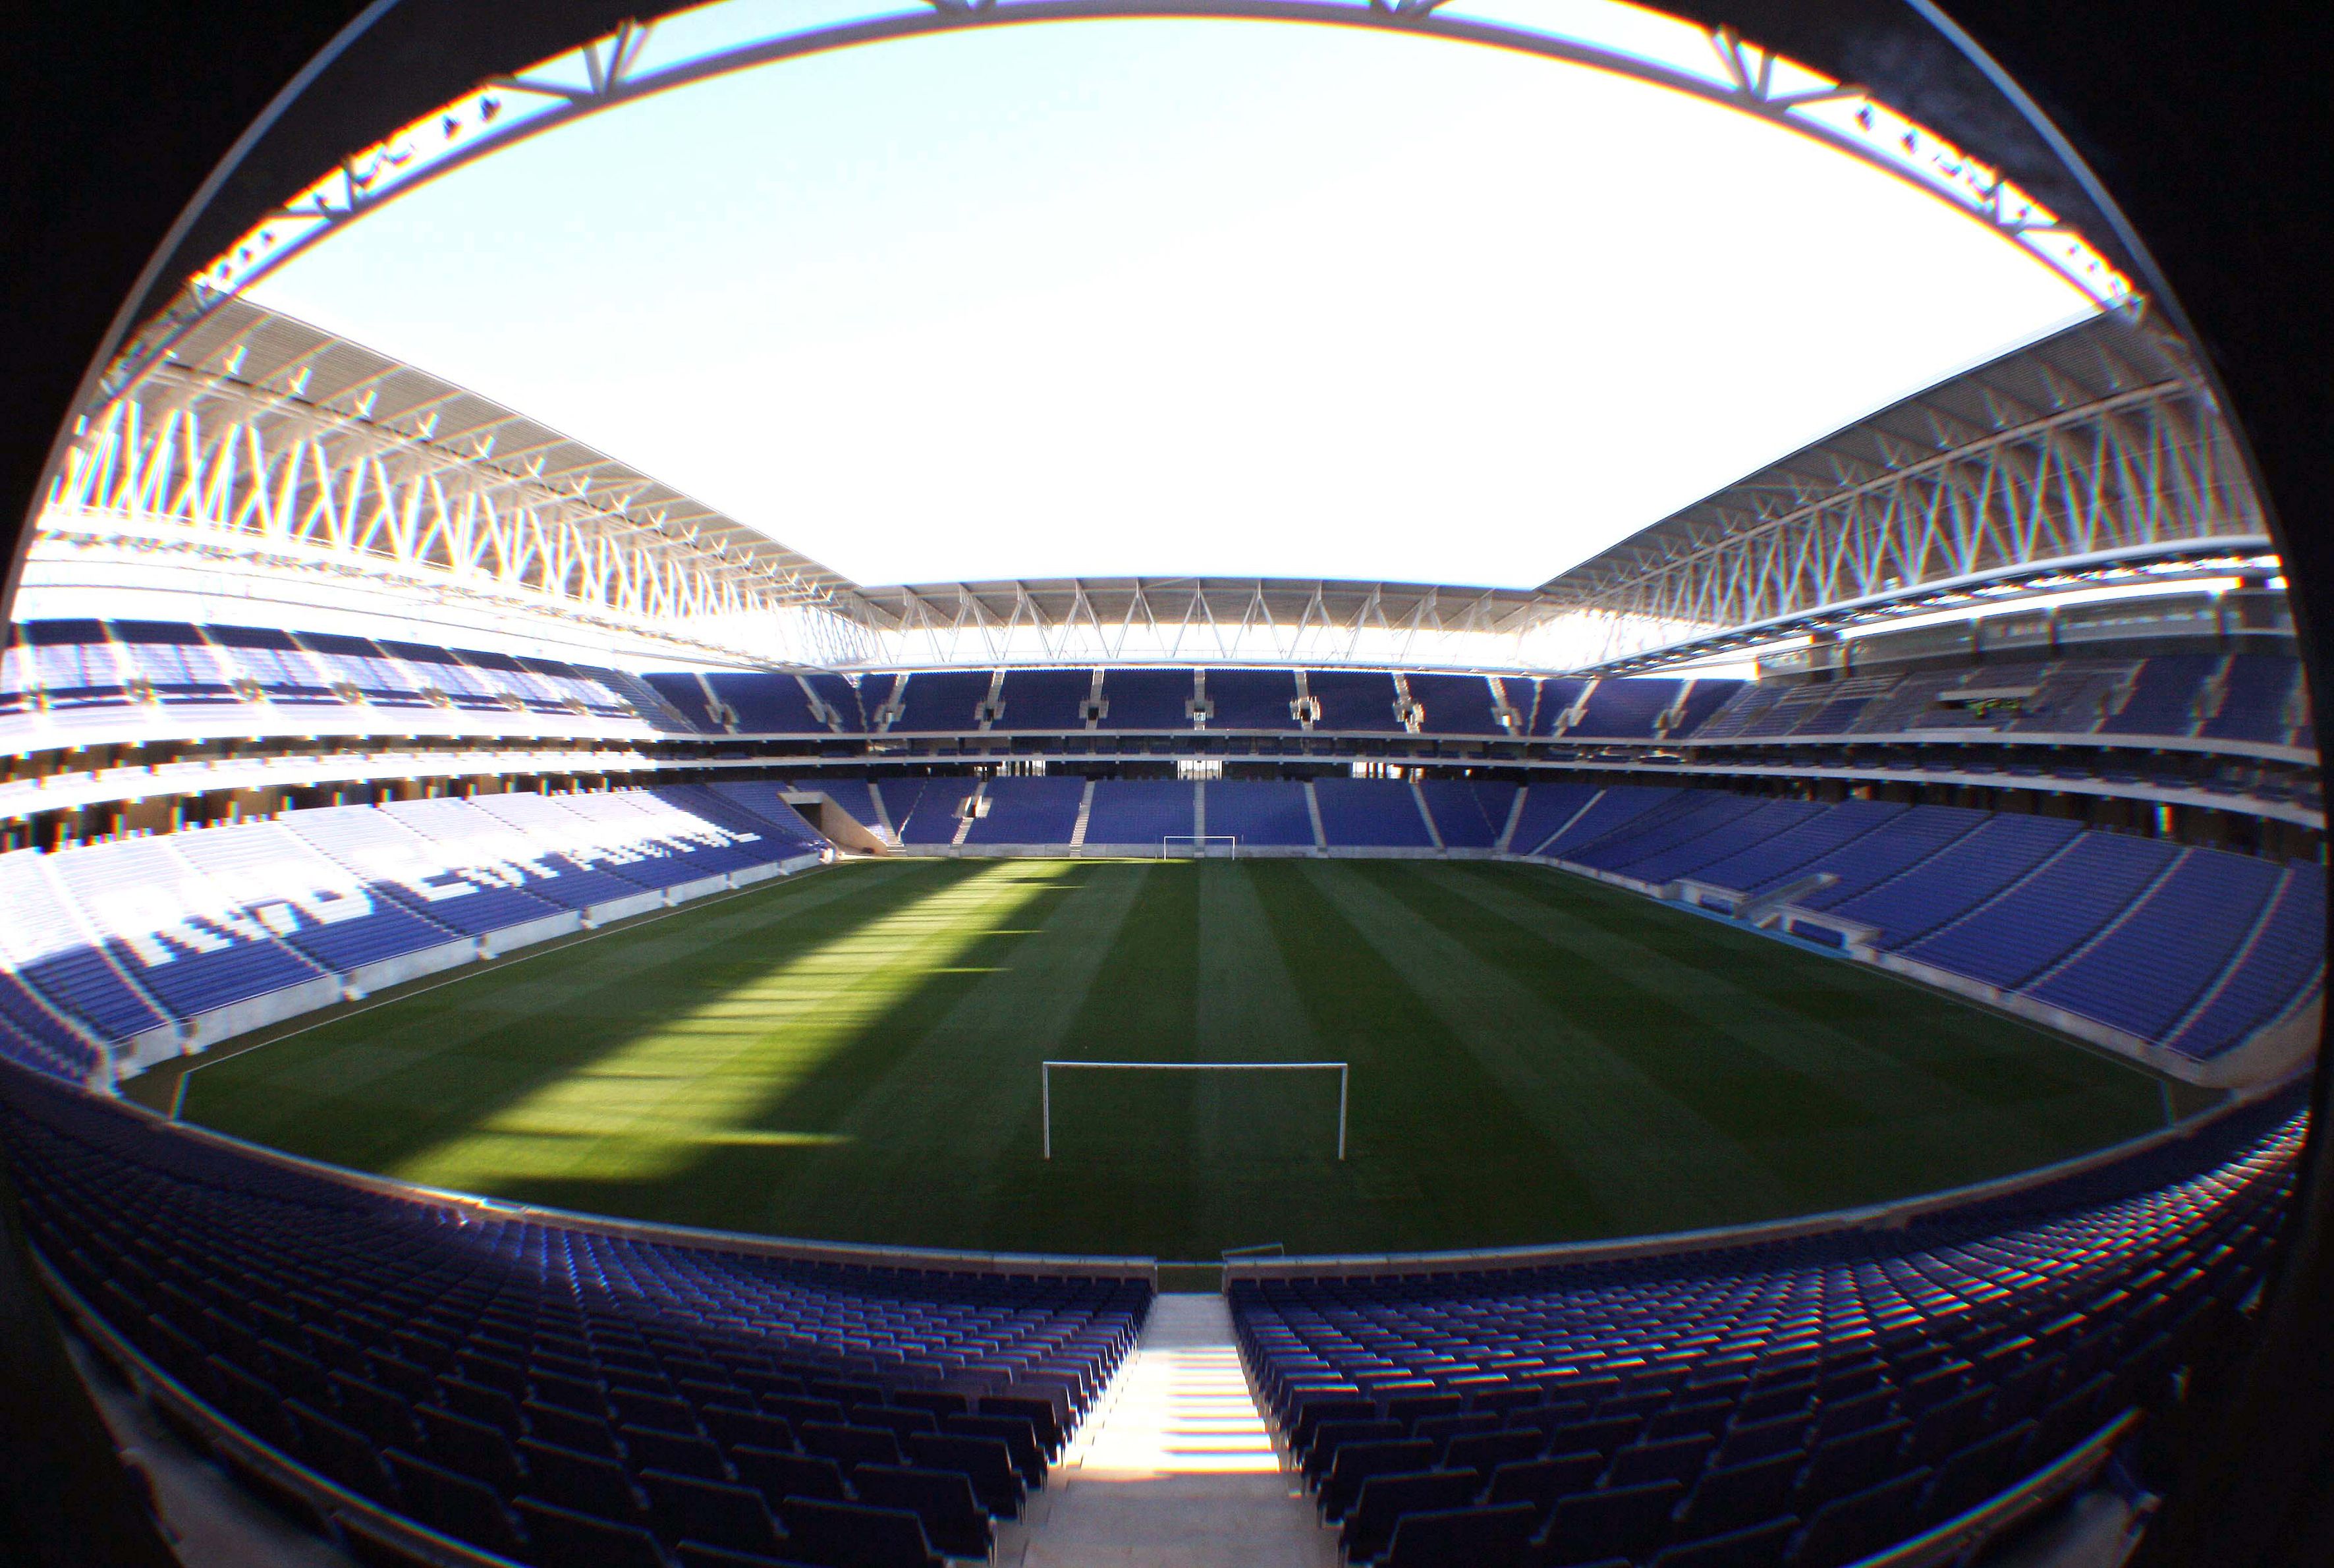 FCC wins award for construction of Espanyol Stadium, named World's Best Sports Facility in 2010